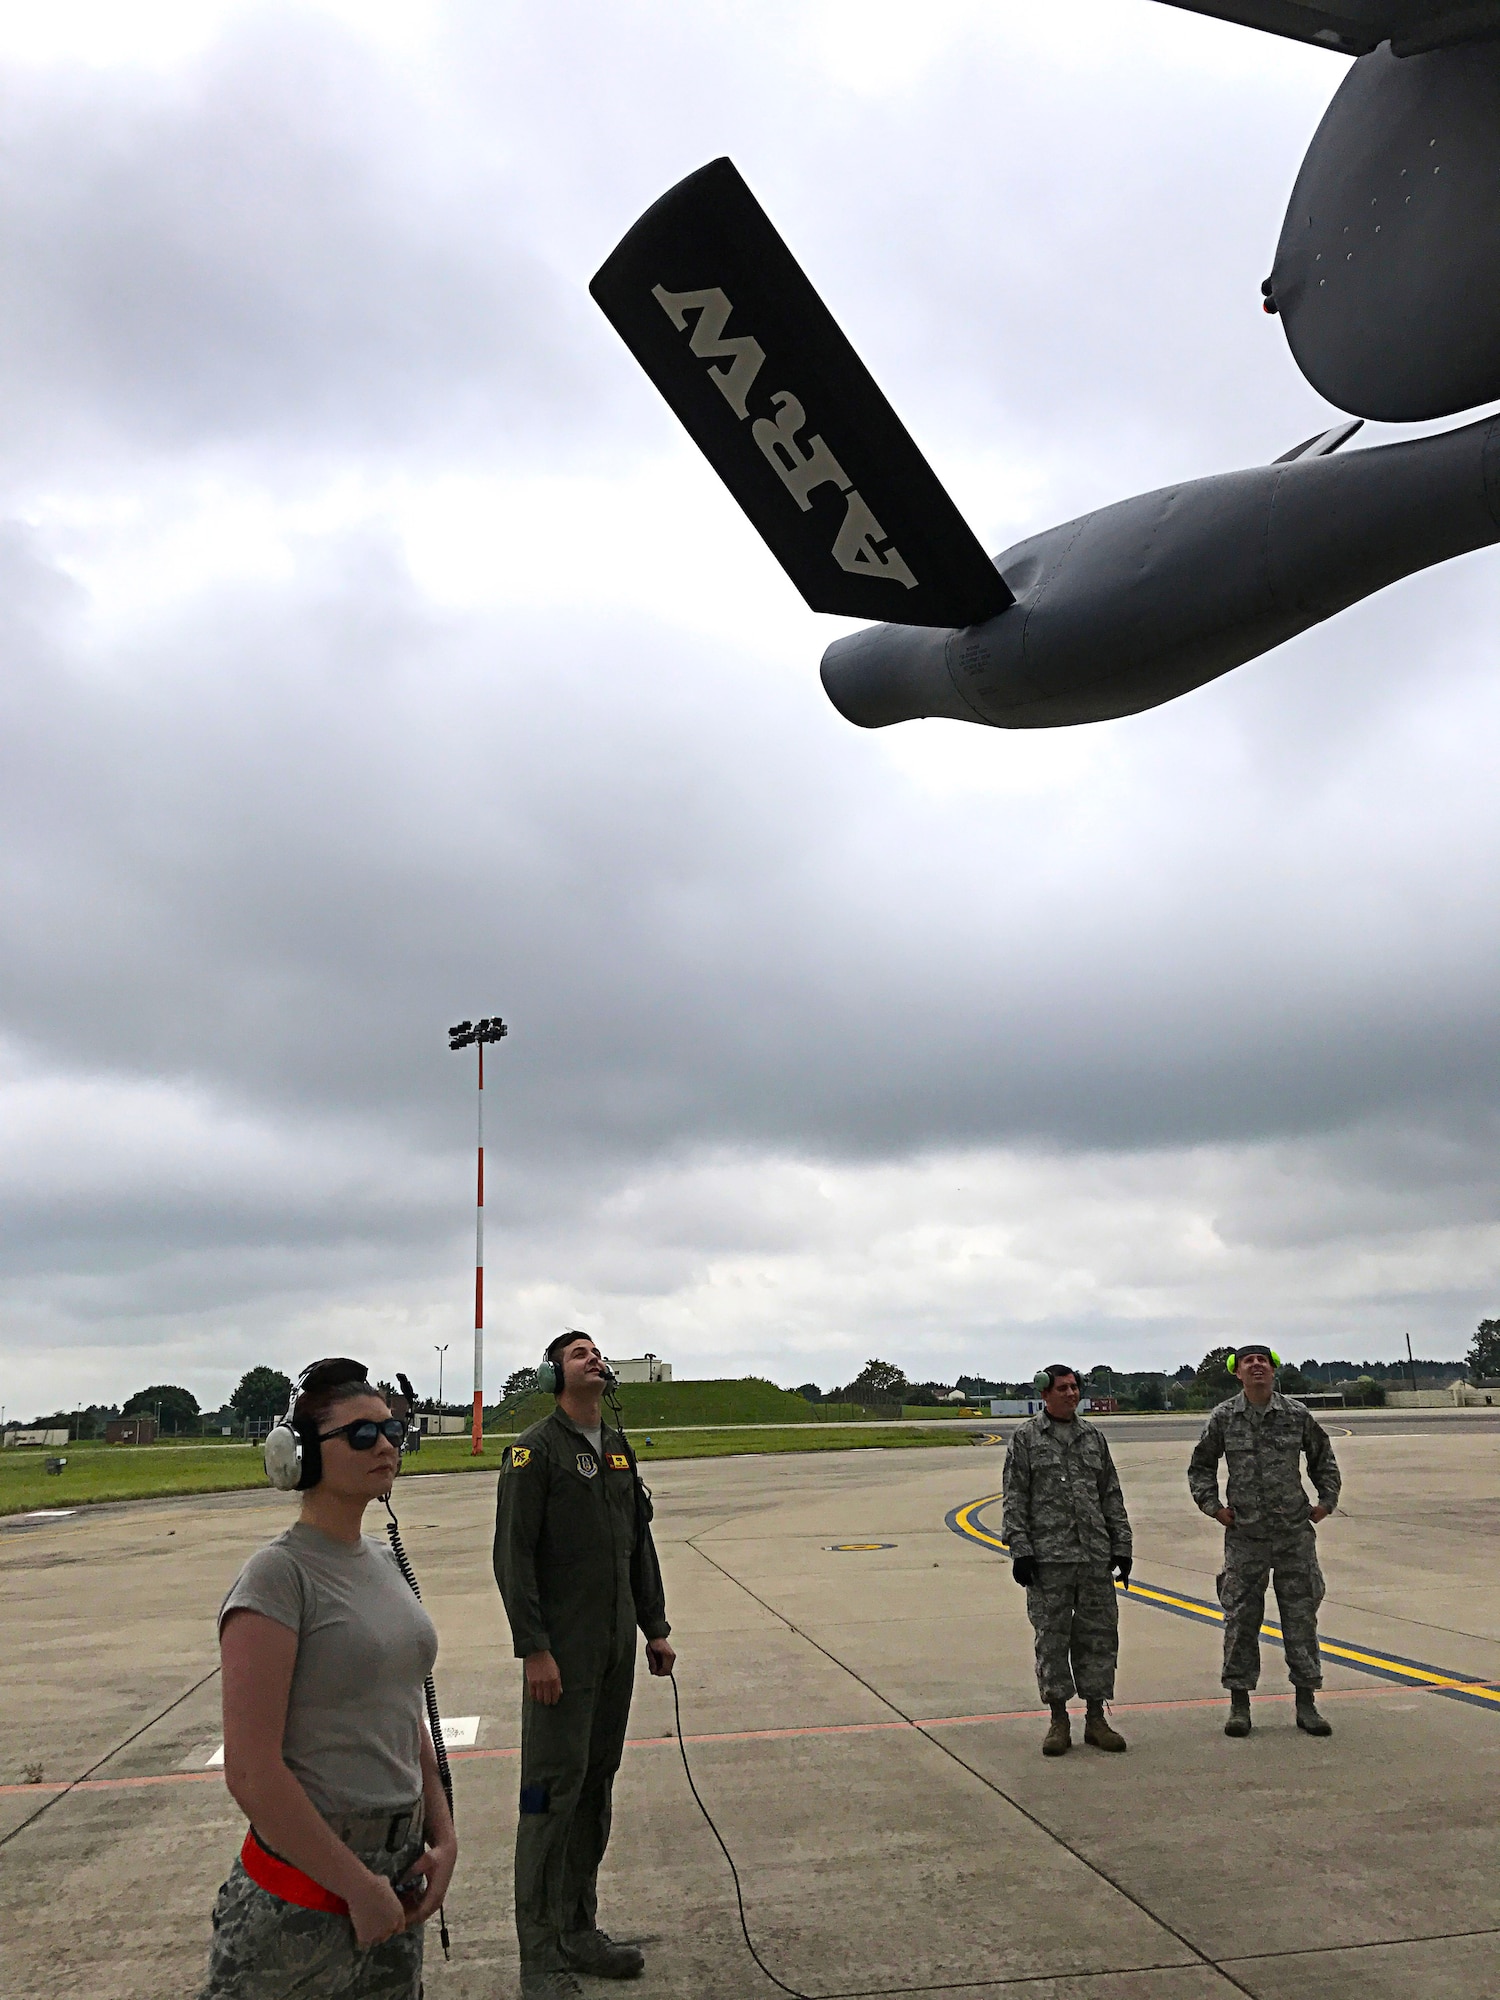 Citizen Airmen with the 507th Aircraft Maintenance Group at Tinker Air Force Base, Okla.,perform pre-flight checks on a KC-135R Stratotanker July 25, 2017, at RAF Mildenhall, England, prior to a refueling mission. In a long-standing partnership between the Air Force Reserve Command and U.S. Air Forces in Europe, members of the 507th Air Refueling Wing are augmenting the 100th Air Refueling Wing July 1-29, to provide KC-135R air refueling support to the European theater of operations. (U.S. Air Force photo/Tech Sgt. Lauren Gleason)